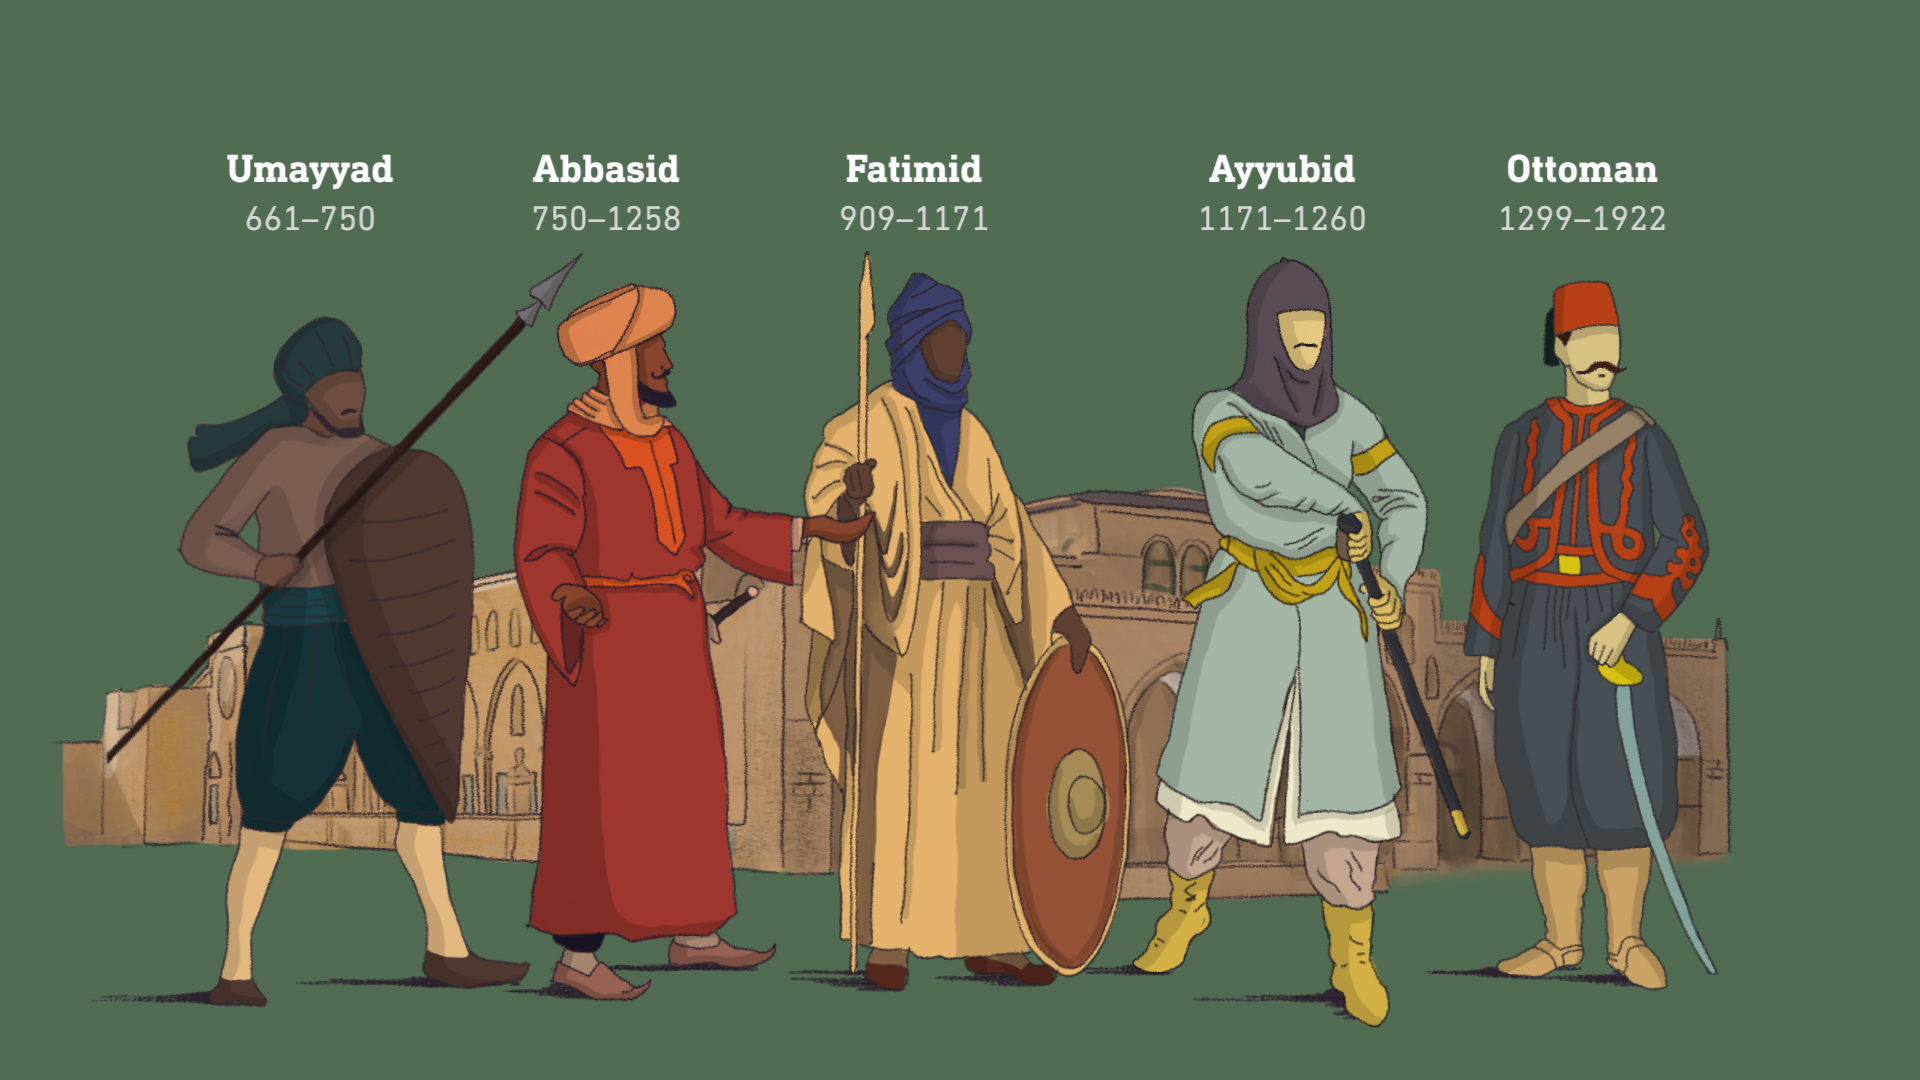 History of Al-Aqsa mosque during the Islamic Caliphate